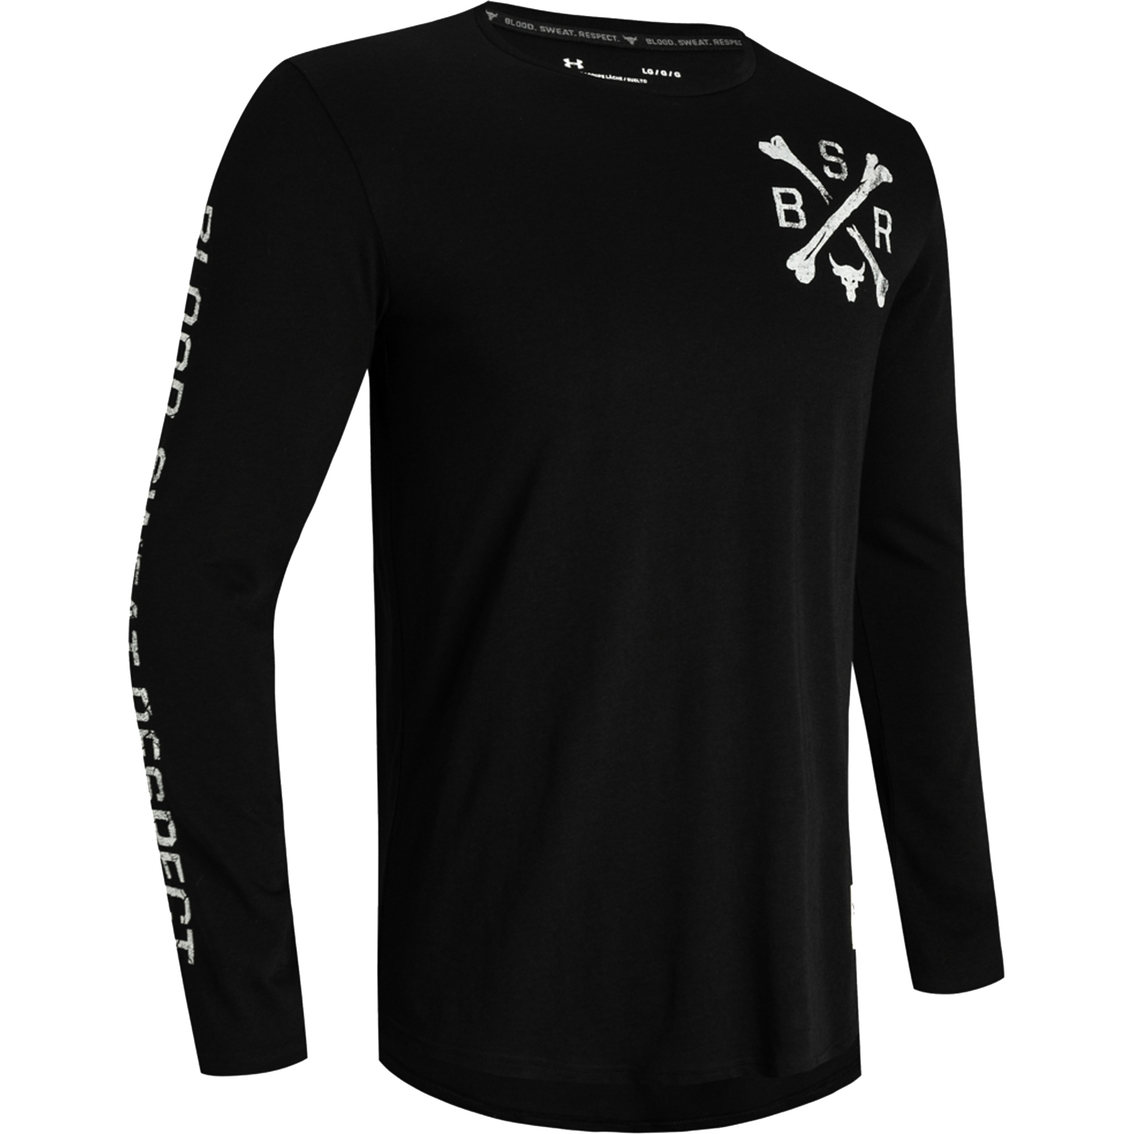 Under Armour Project Rock Bsr Top | Shirts | Clothing & Accessories ...